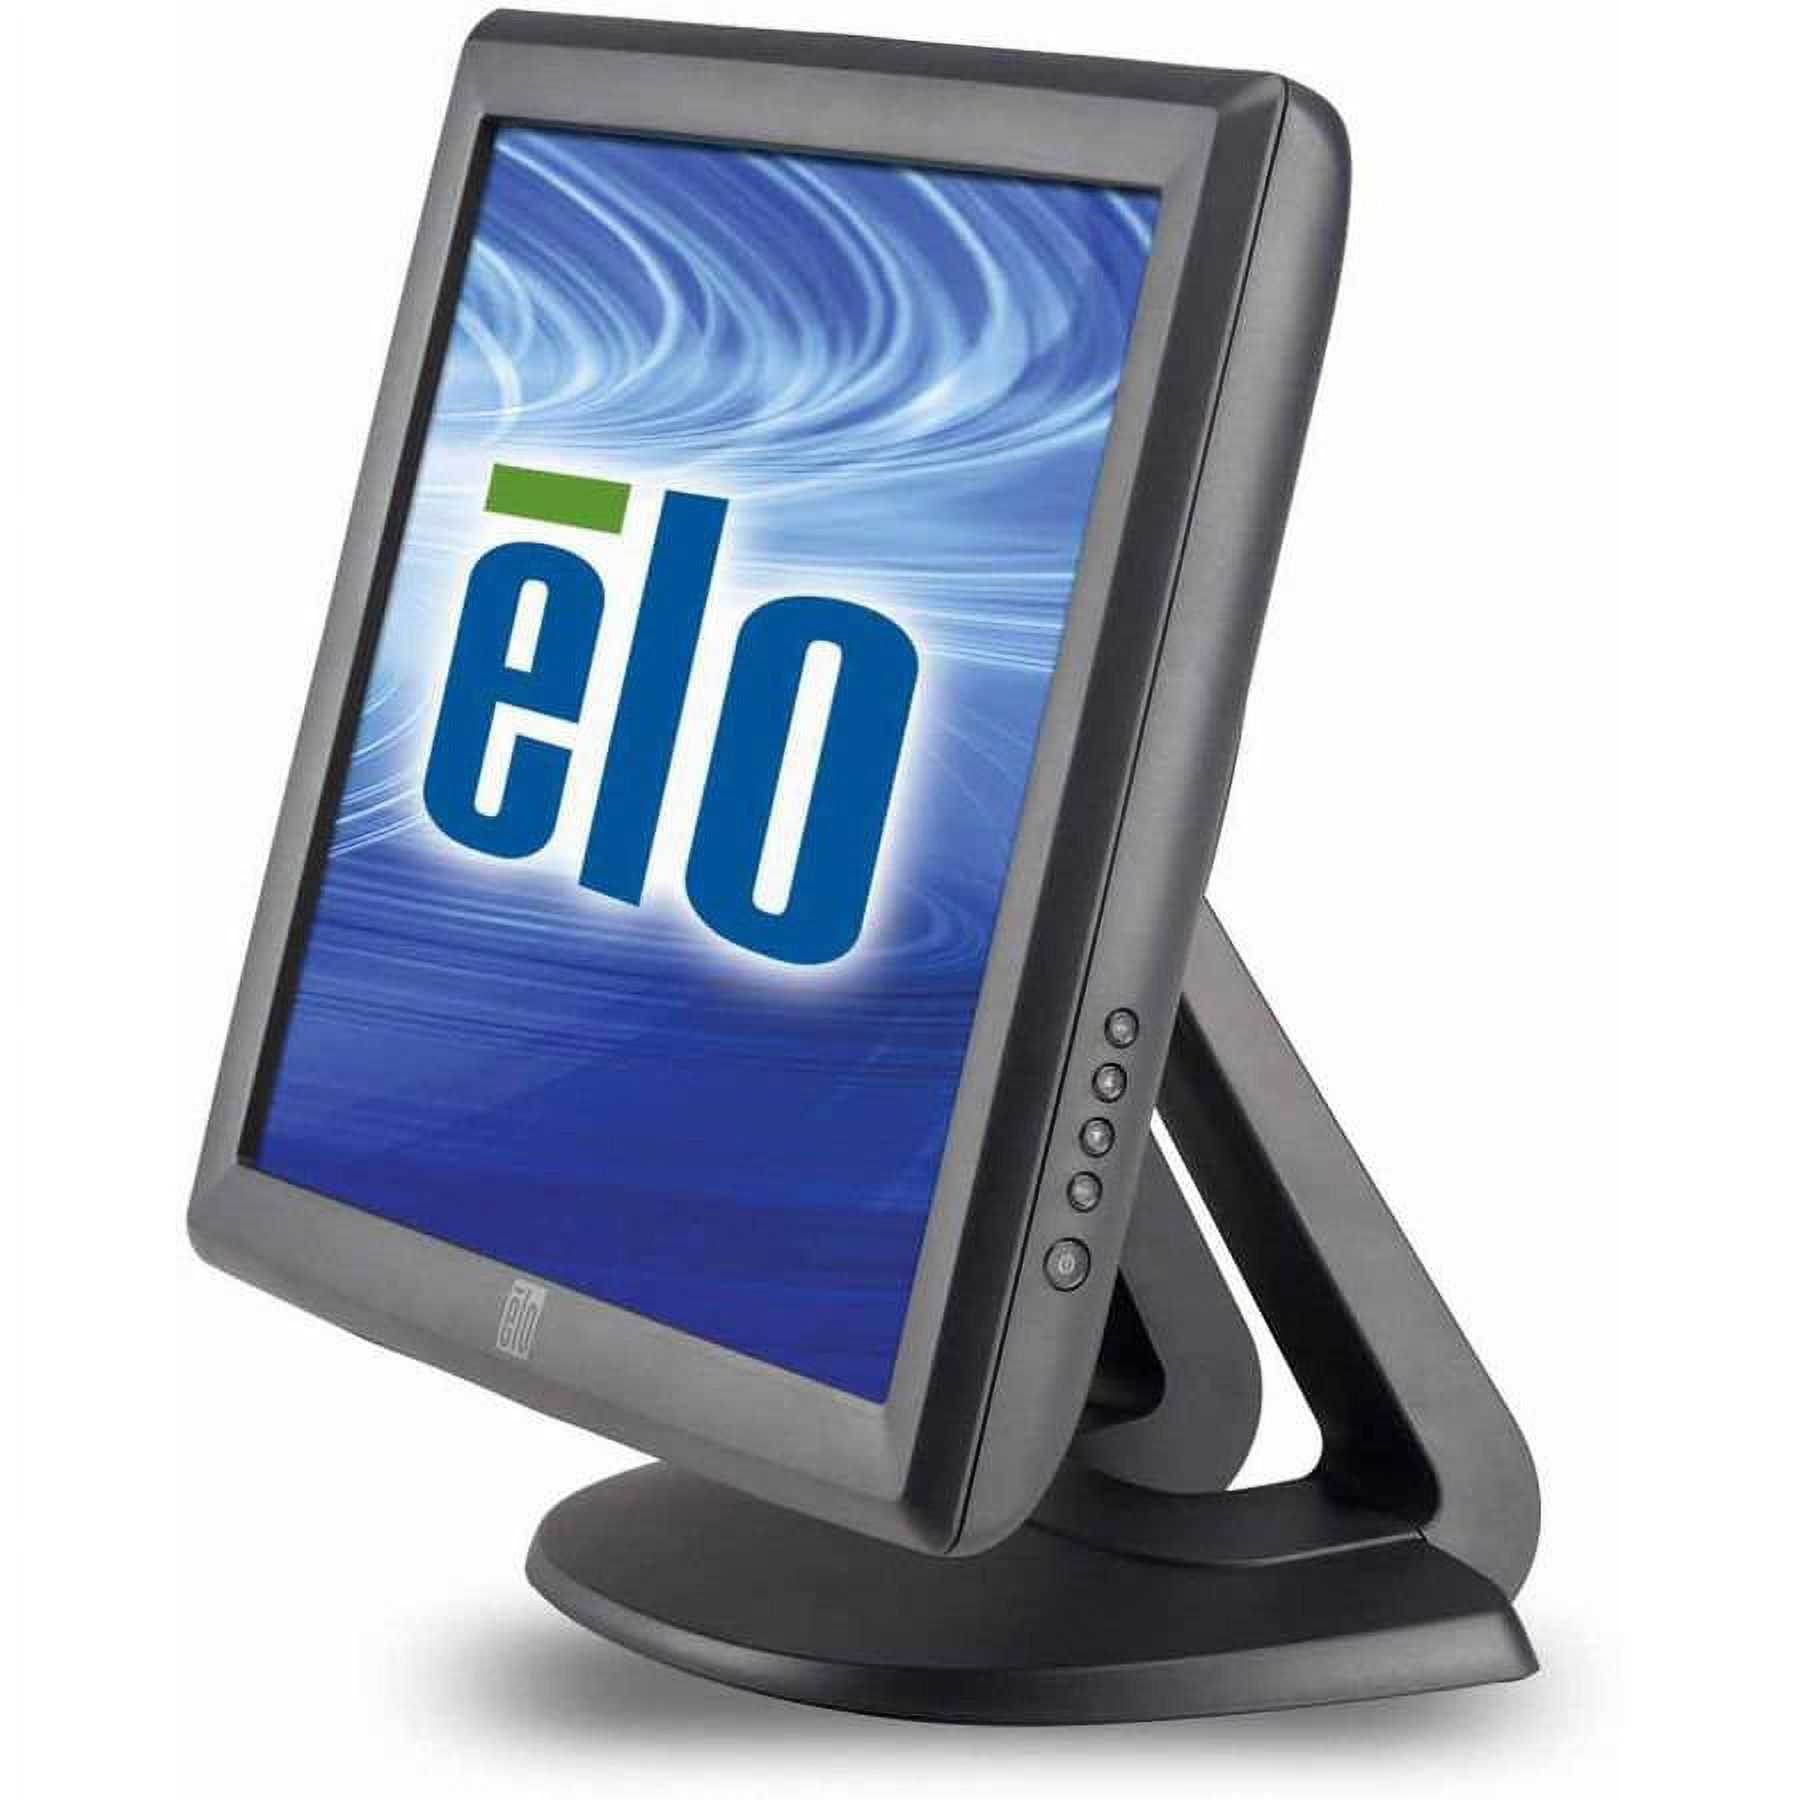 Elo Touch E603162 1715L 17-inch AccuTouch 5-Wire Resistive POS Touch Screen Monitor - image 2 of 4